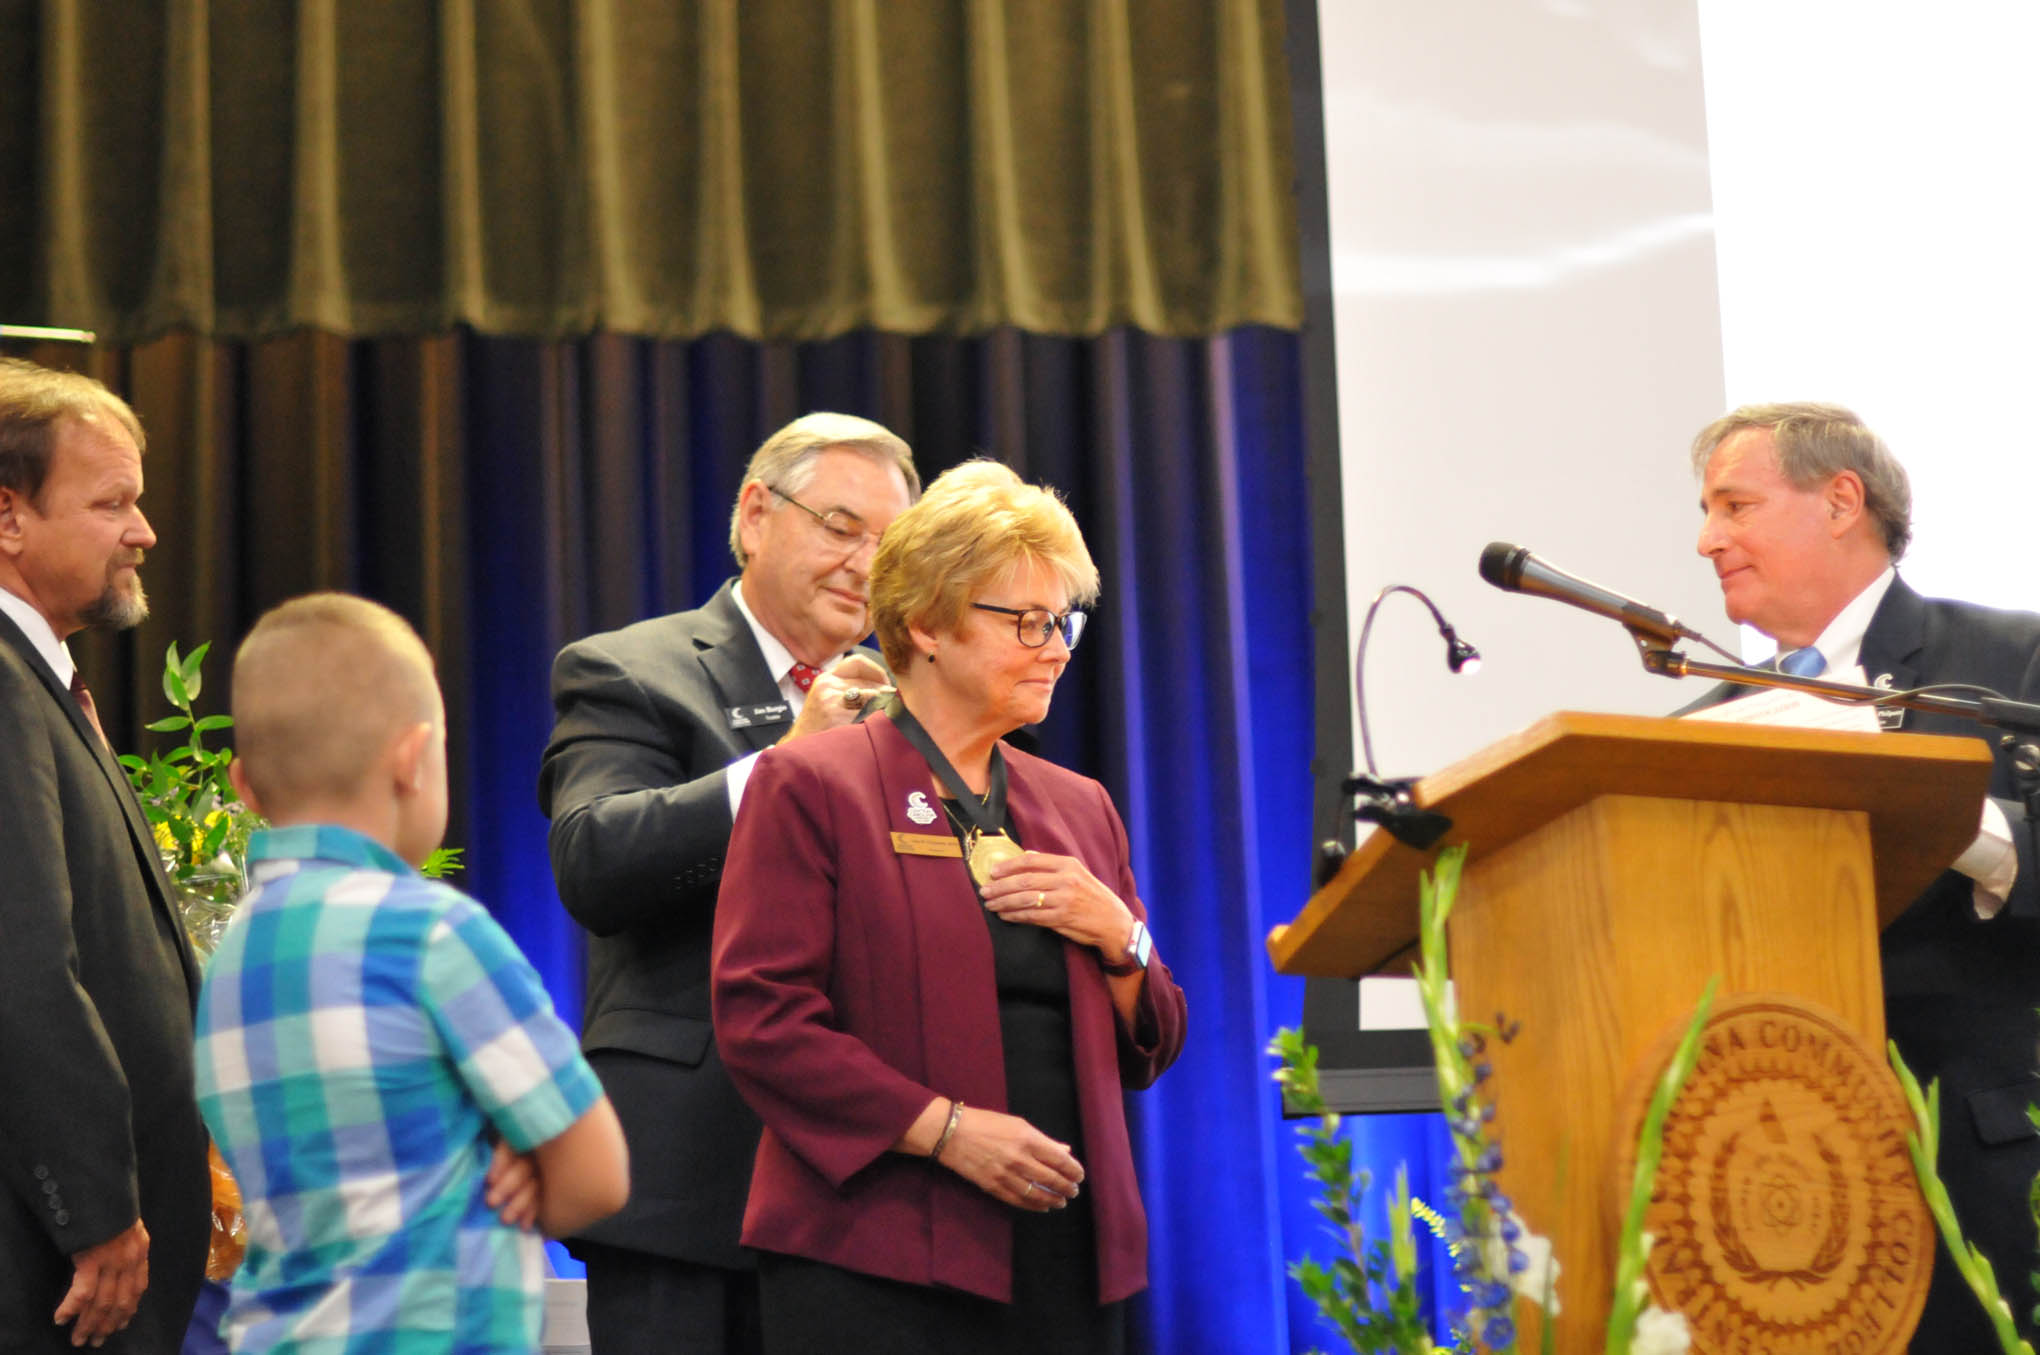 Click to enlarge,  Central Carolina Community College President Dr. Lisa M. Chapman receives the Presidential Medallion from Jim Burgin, Vice Chairman of the CCCC Board of Trustees, and from Julian Philpott (right), Chairman of the CCCC Board of Trustees, during her Installation as CCCC President on Sept. 26. 